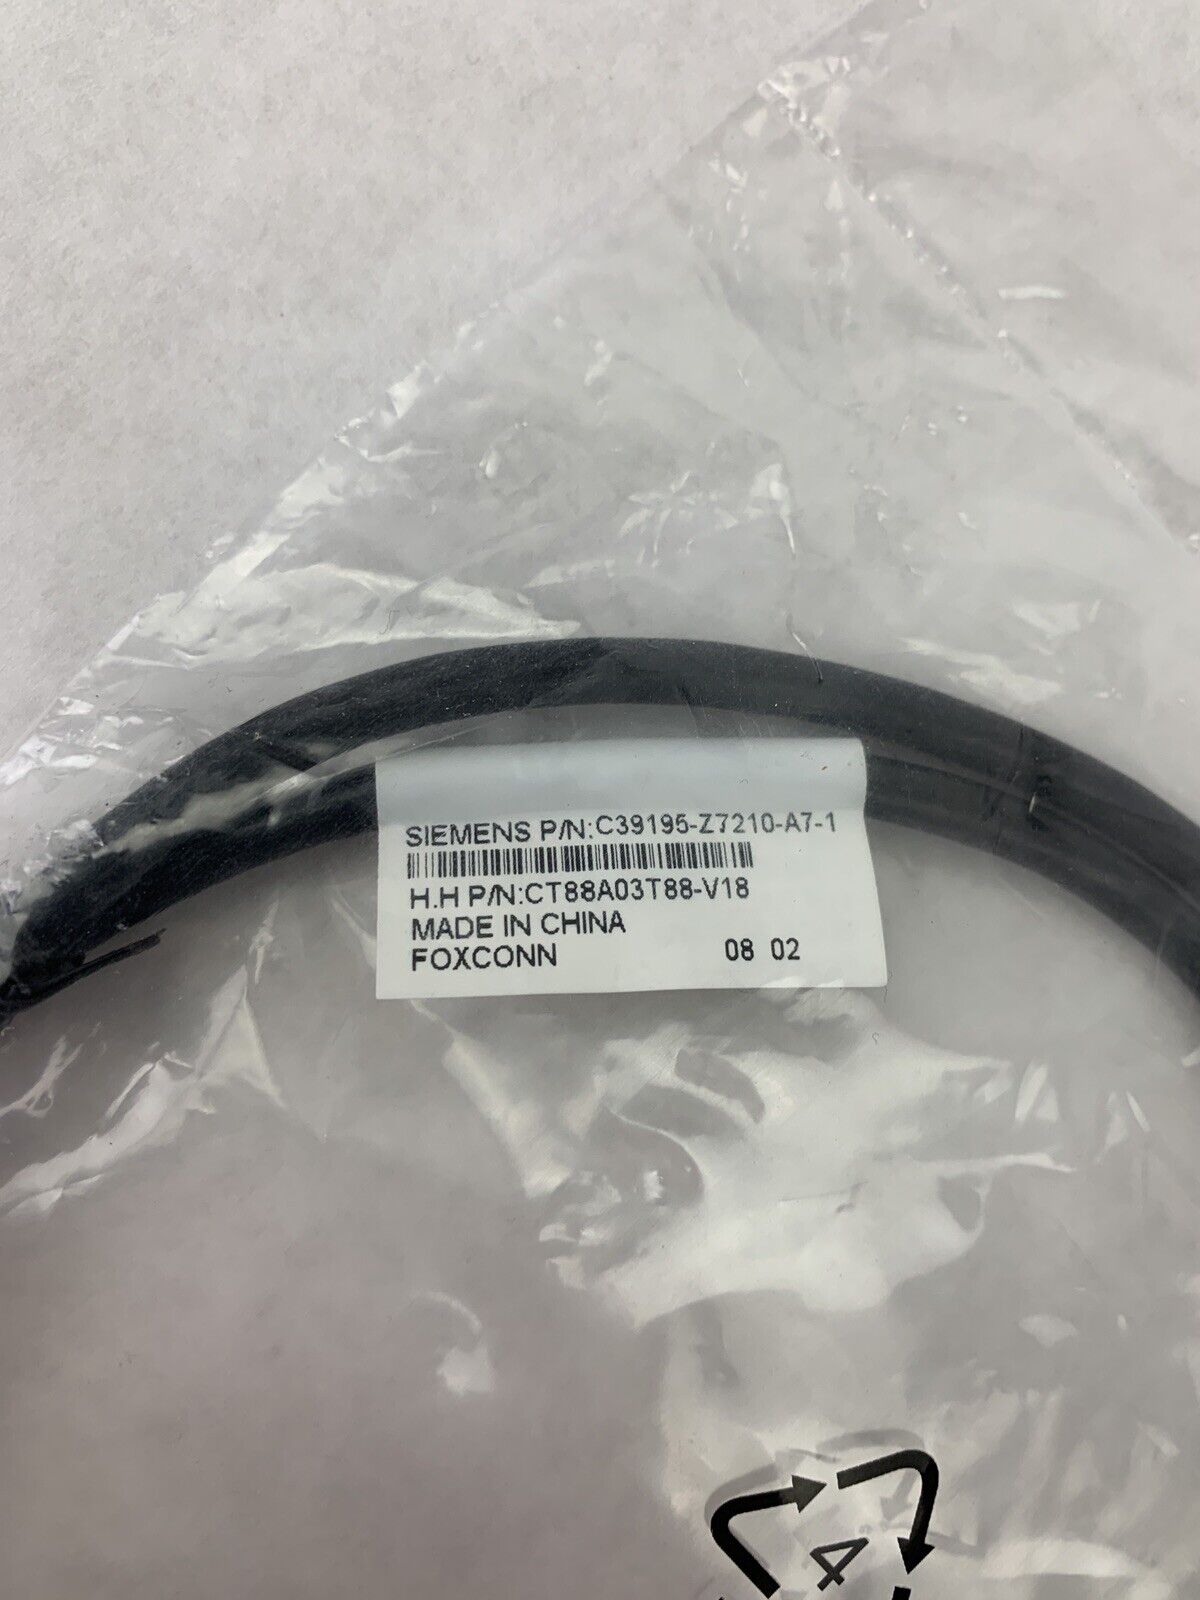 New Siemens C39195-Z7210-A7-1 CT88A03T88-V18 Foxconn Cable